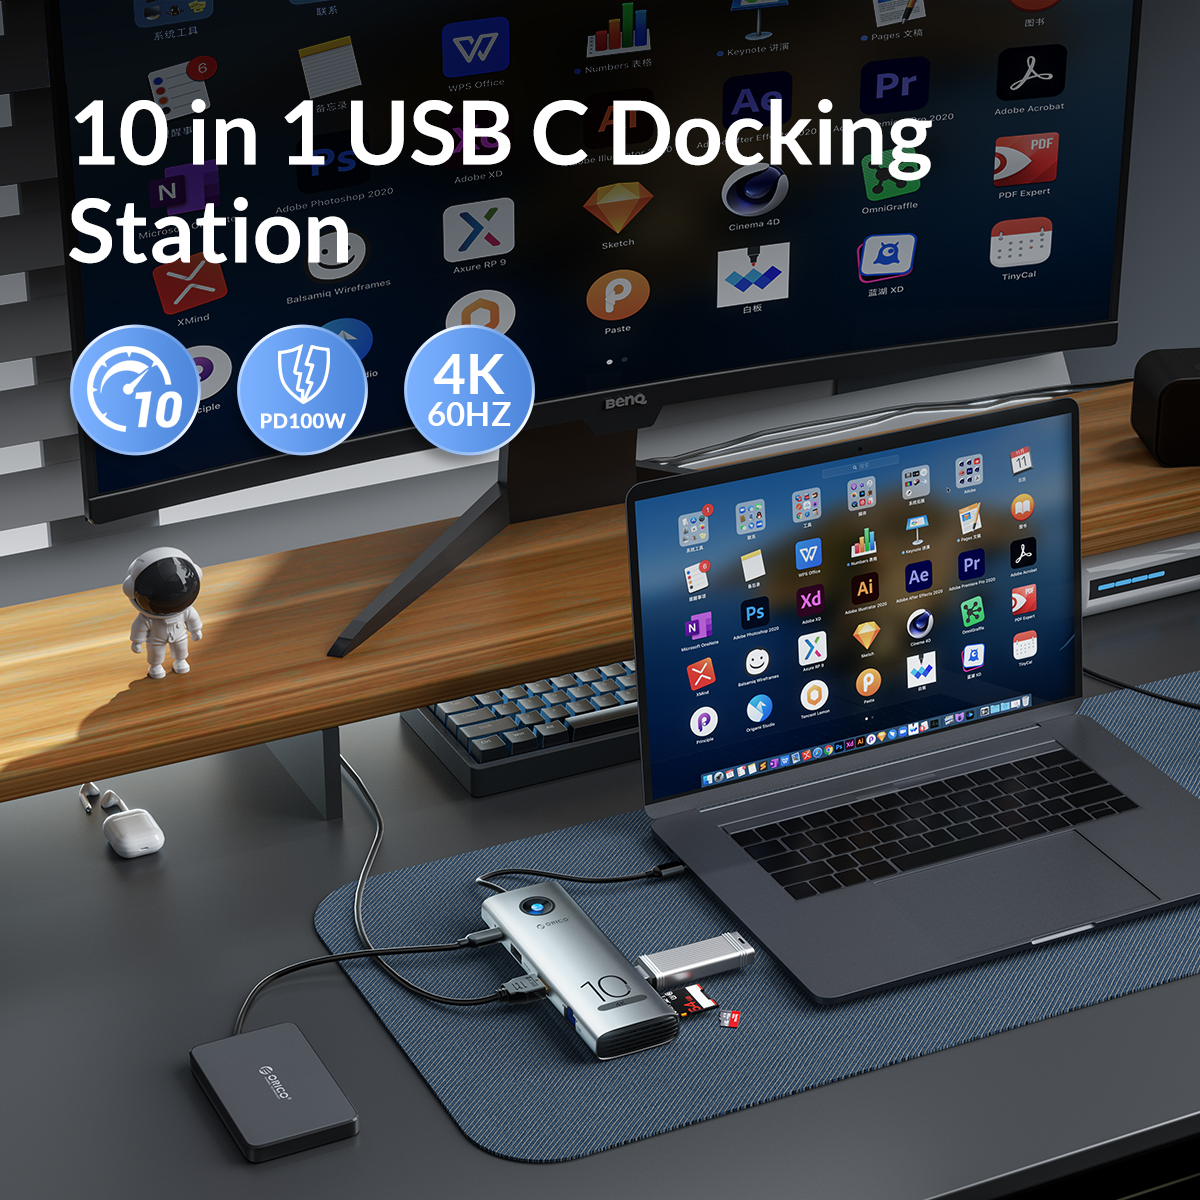 ORICO 10-in-1 10Gbps USB C Docking Station with USB 3.0 10Gbps 